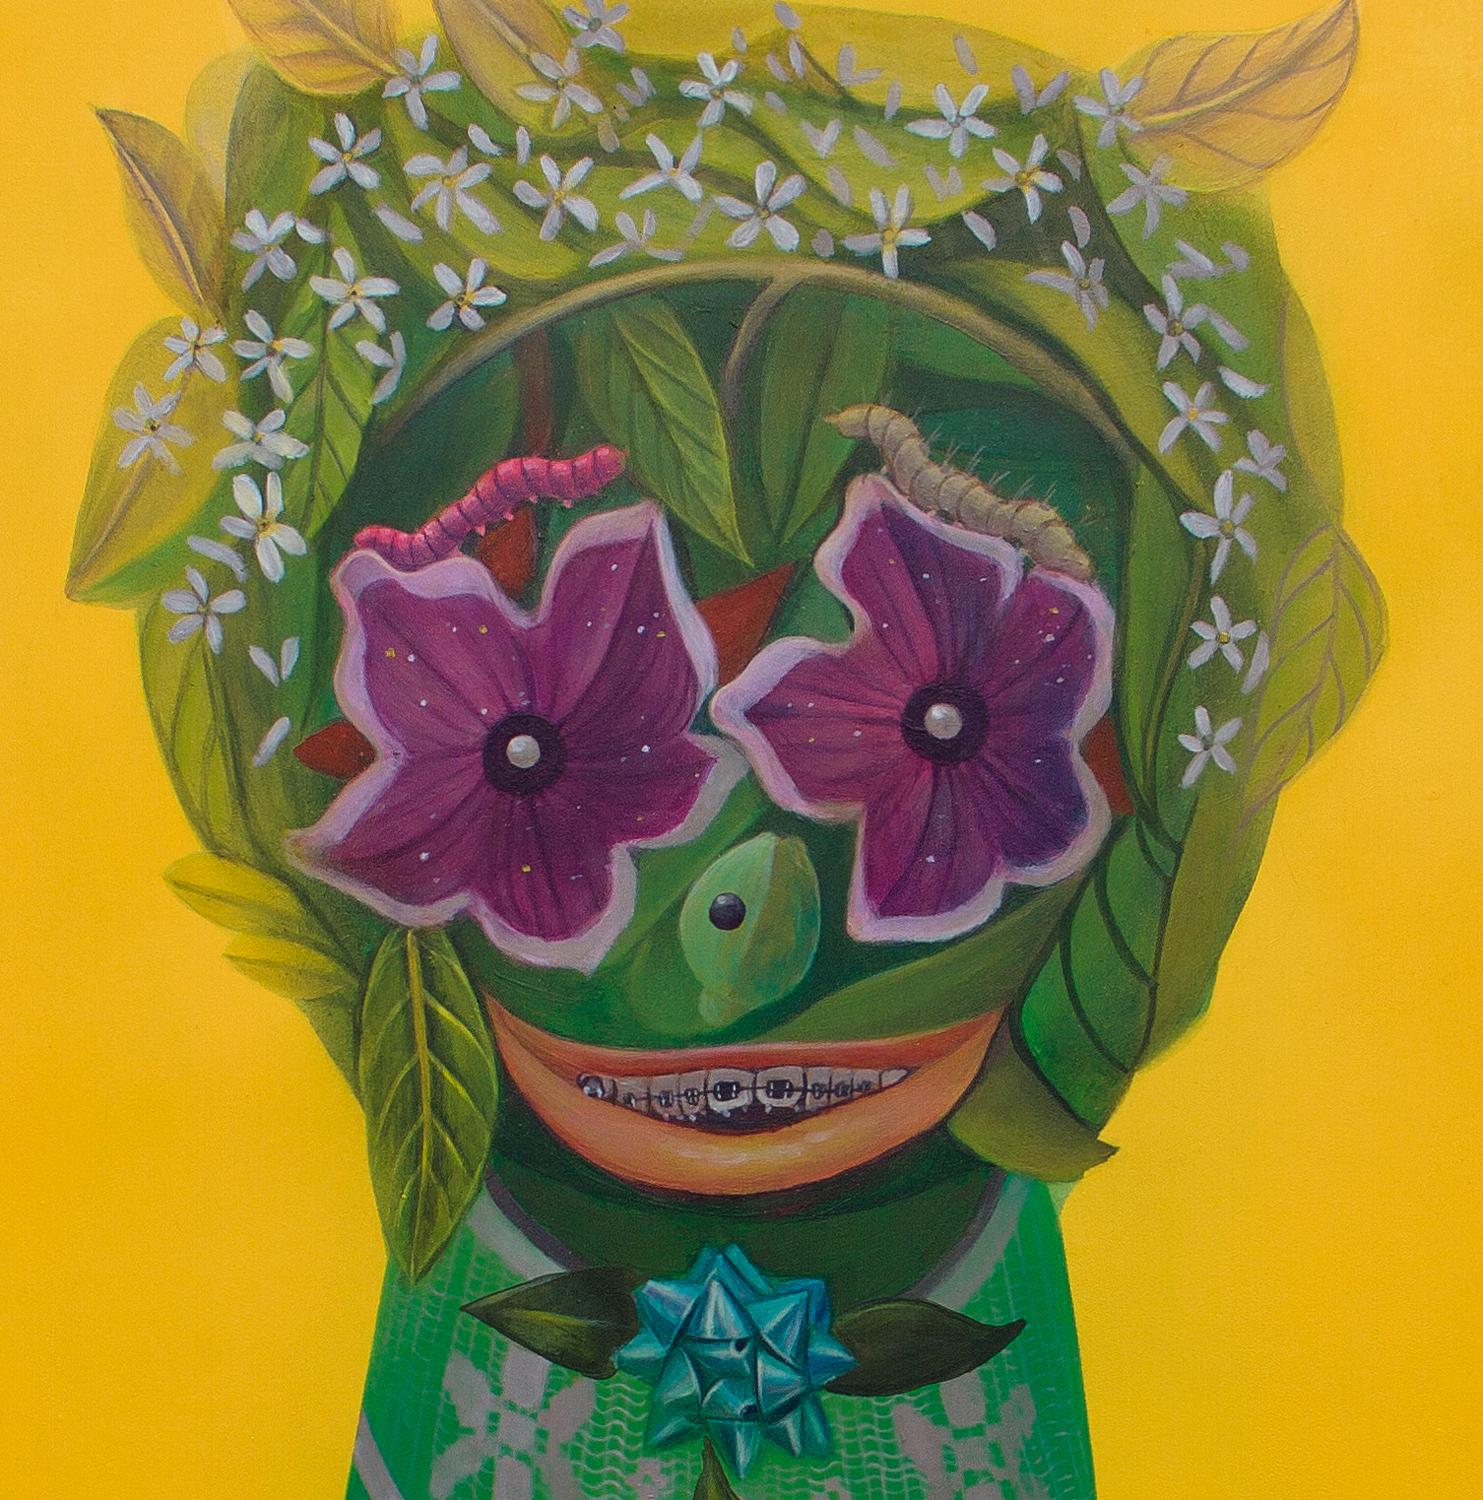 Contemporary Pop Surrealistic Antropomorphic Figure with Plants Insects Brackets - Pop Art Painting by Natasha Lelenco